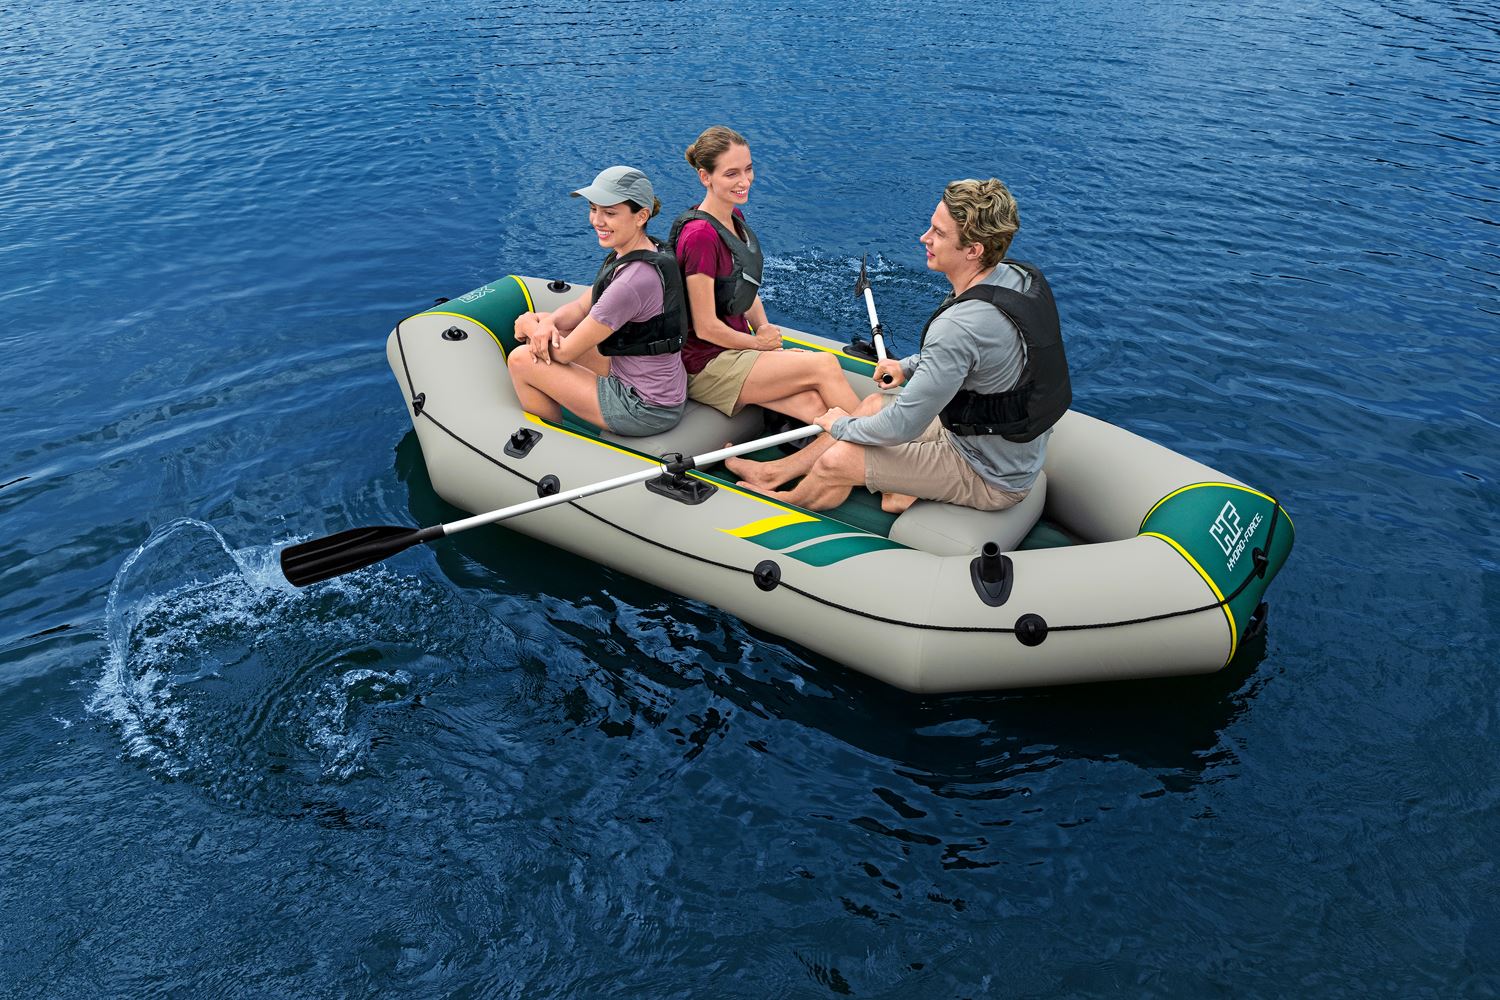 Bestway inflatable boat 'Hydro Force Ranger Elite X3' set - 3 people -  accessories included